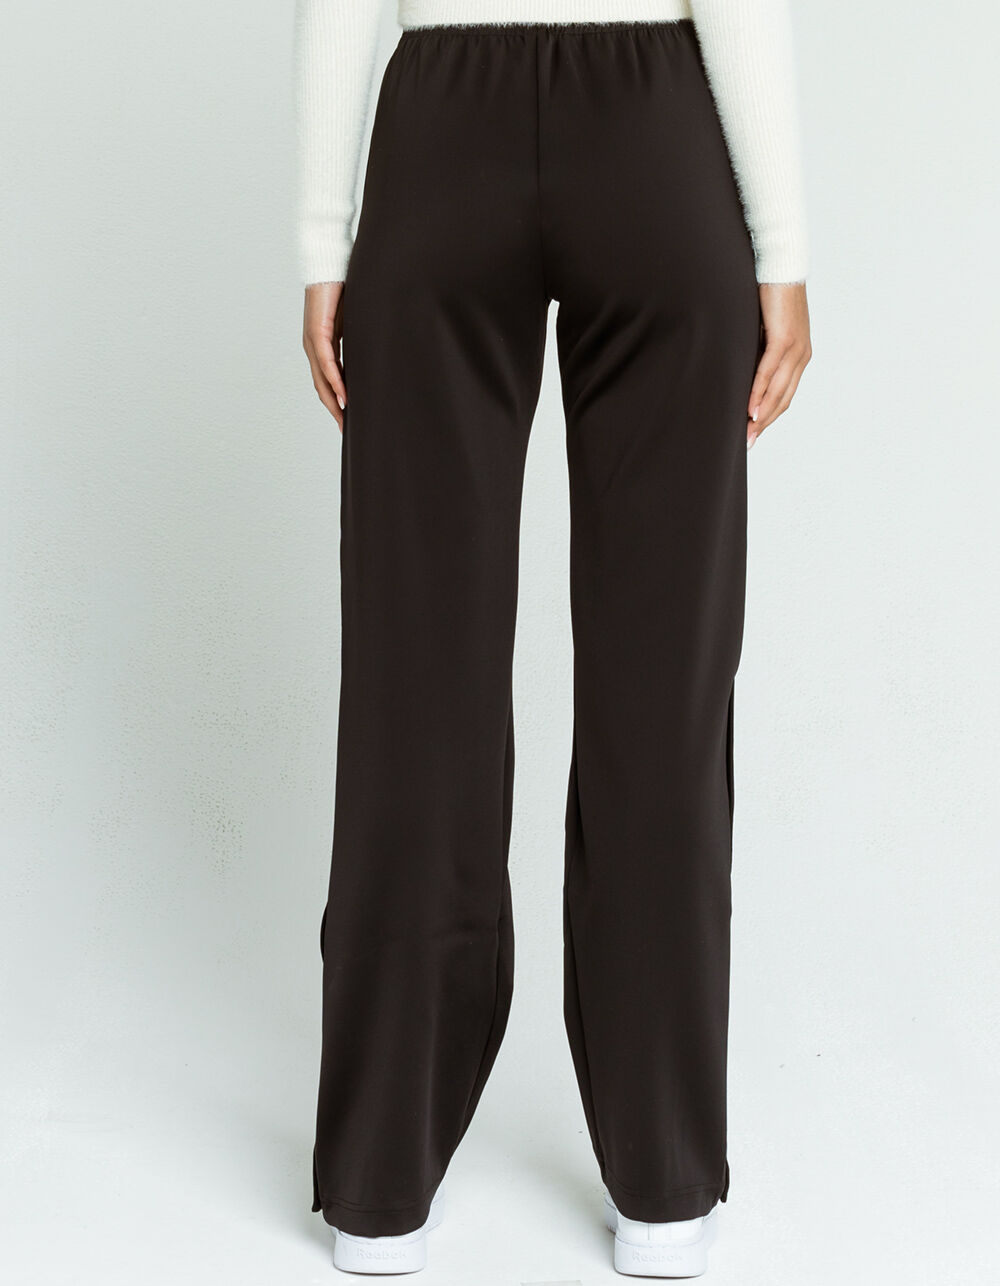 TRACTR Side Snap Womens Track Pants - BLACK | Tillys